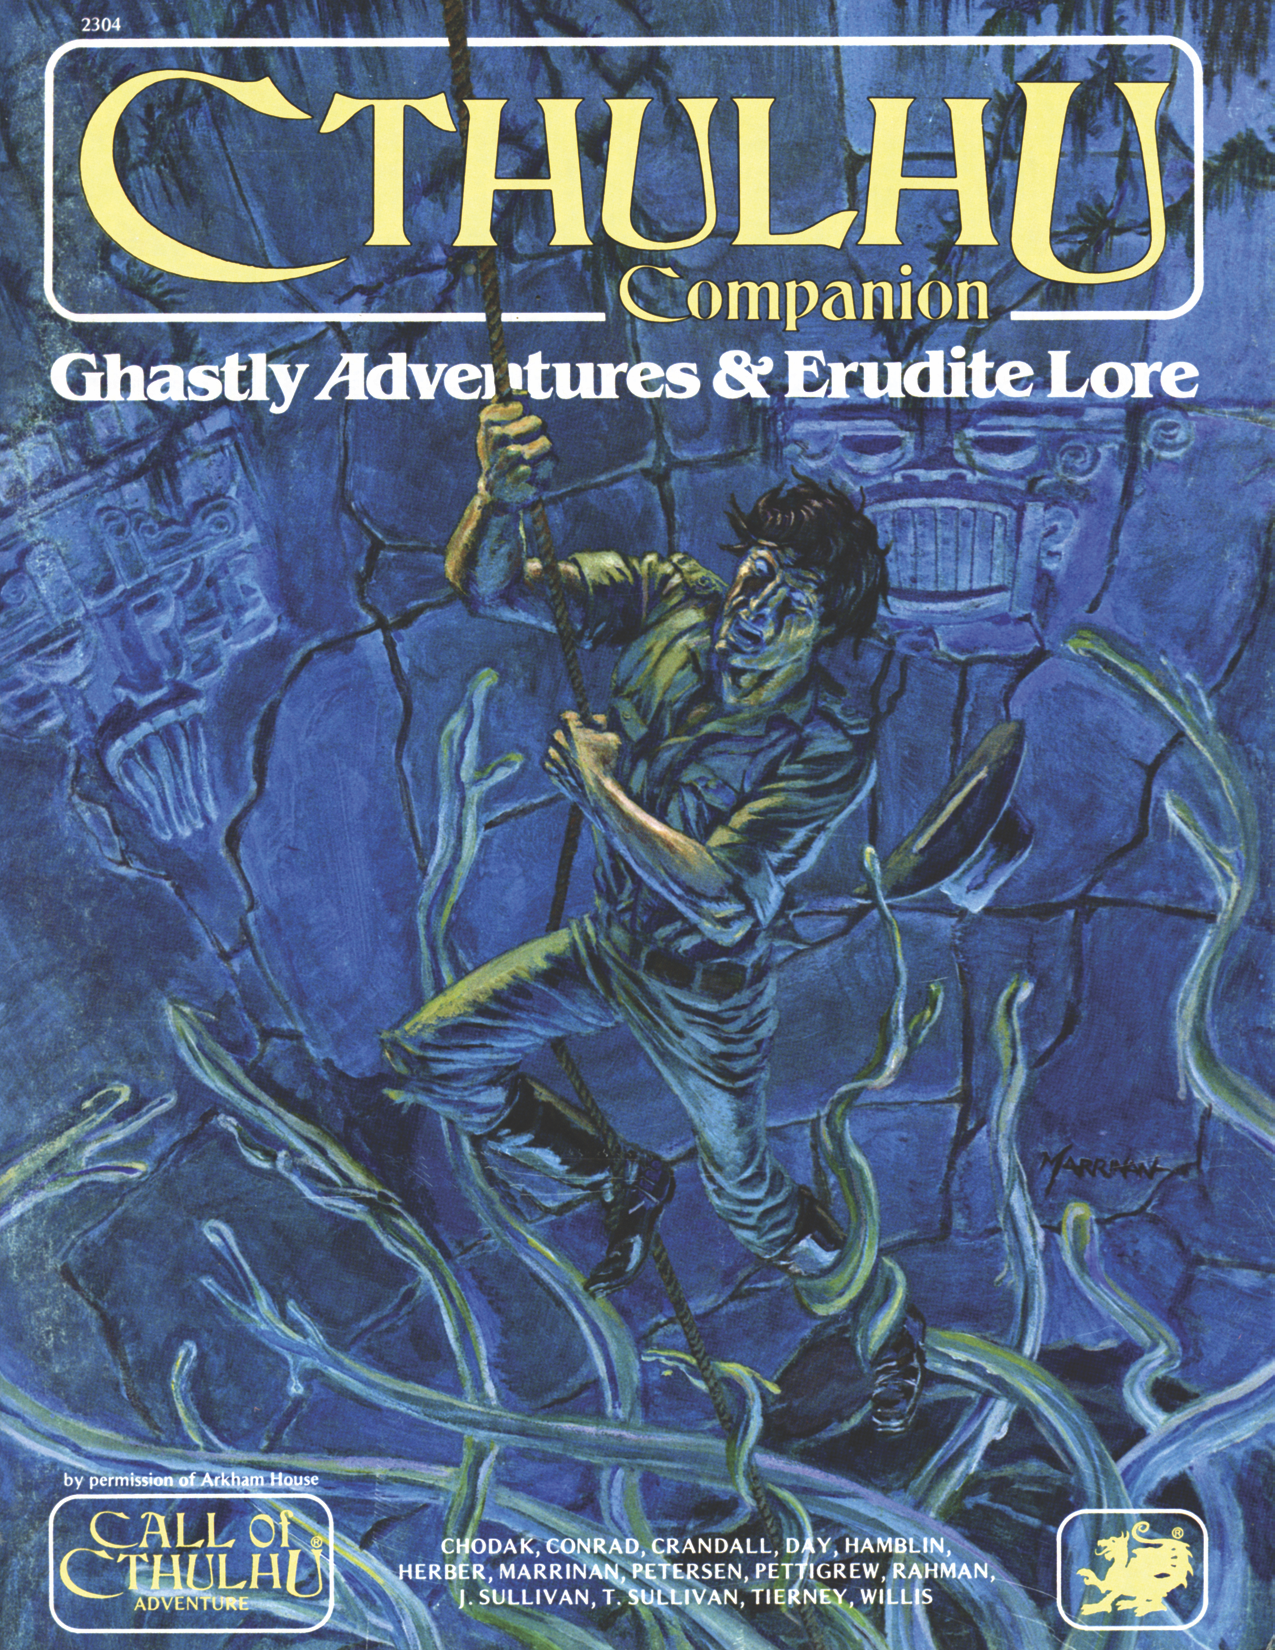 cthulhu-companion-cover.png